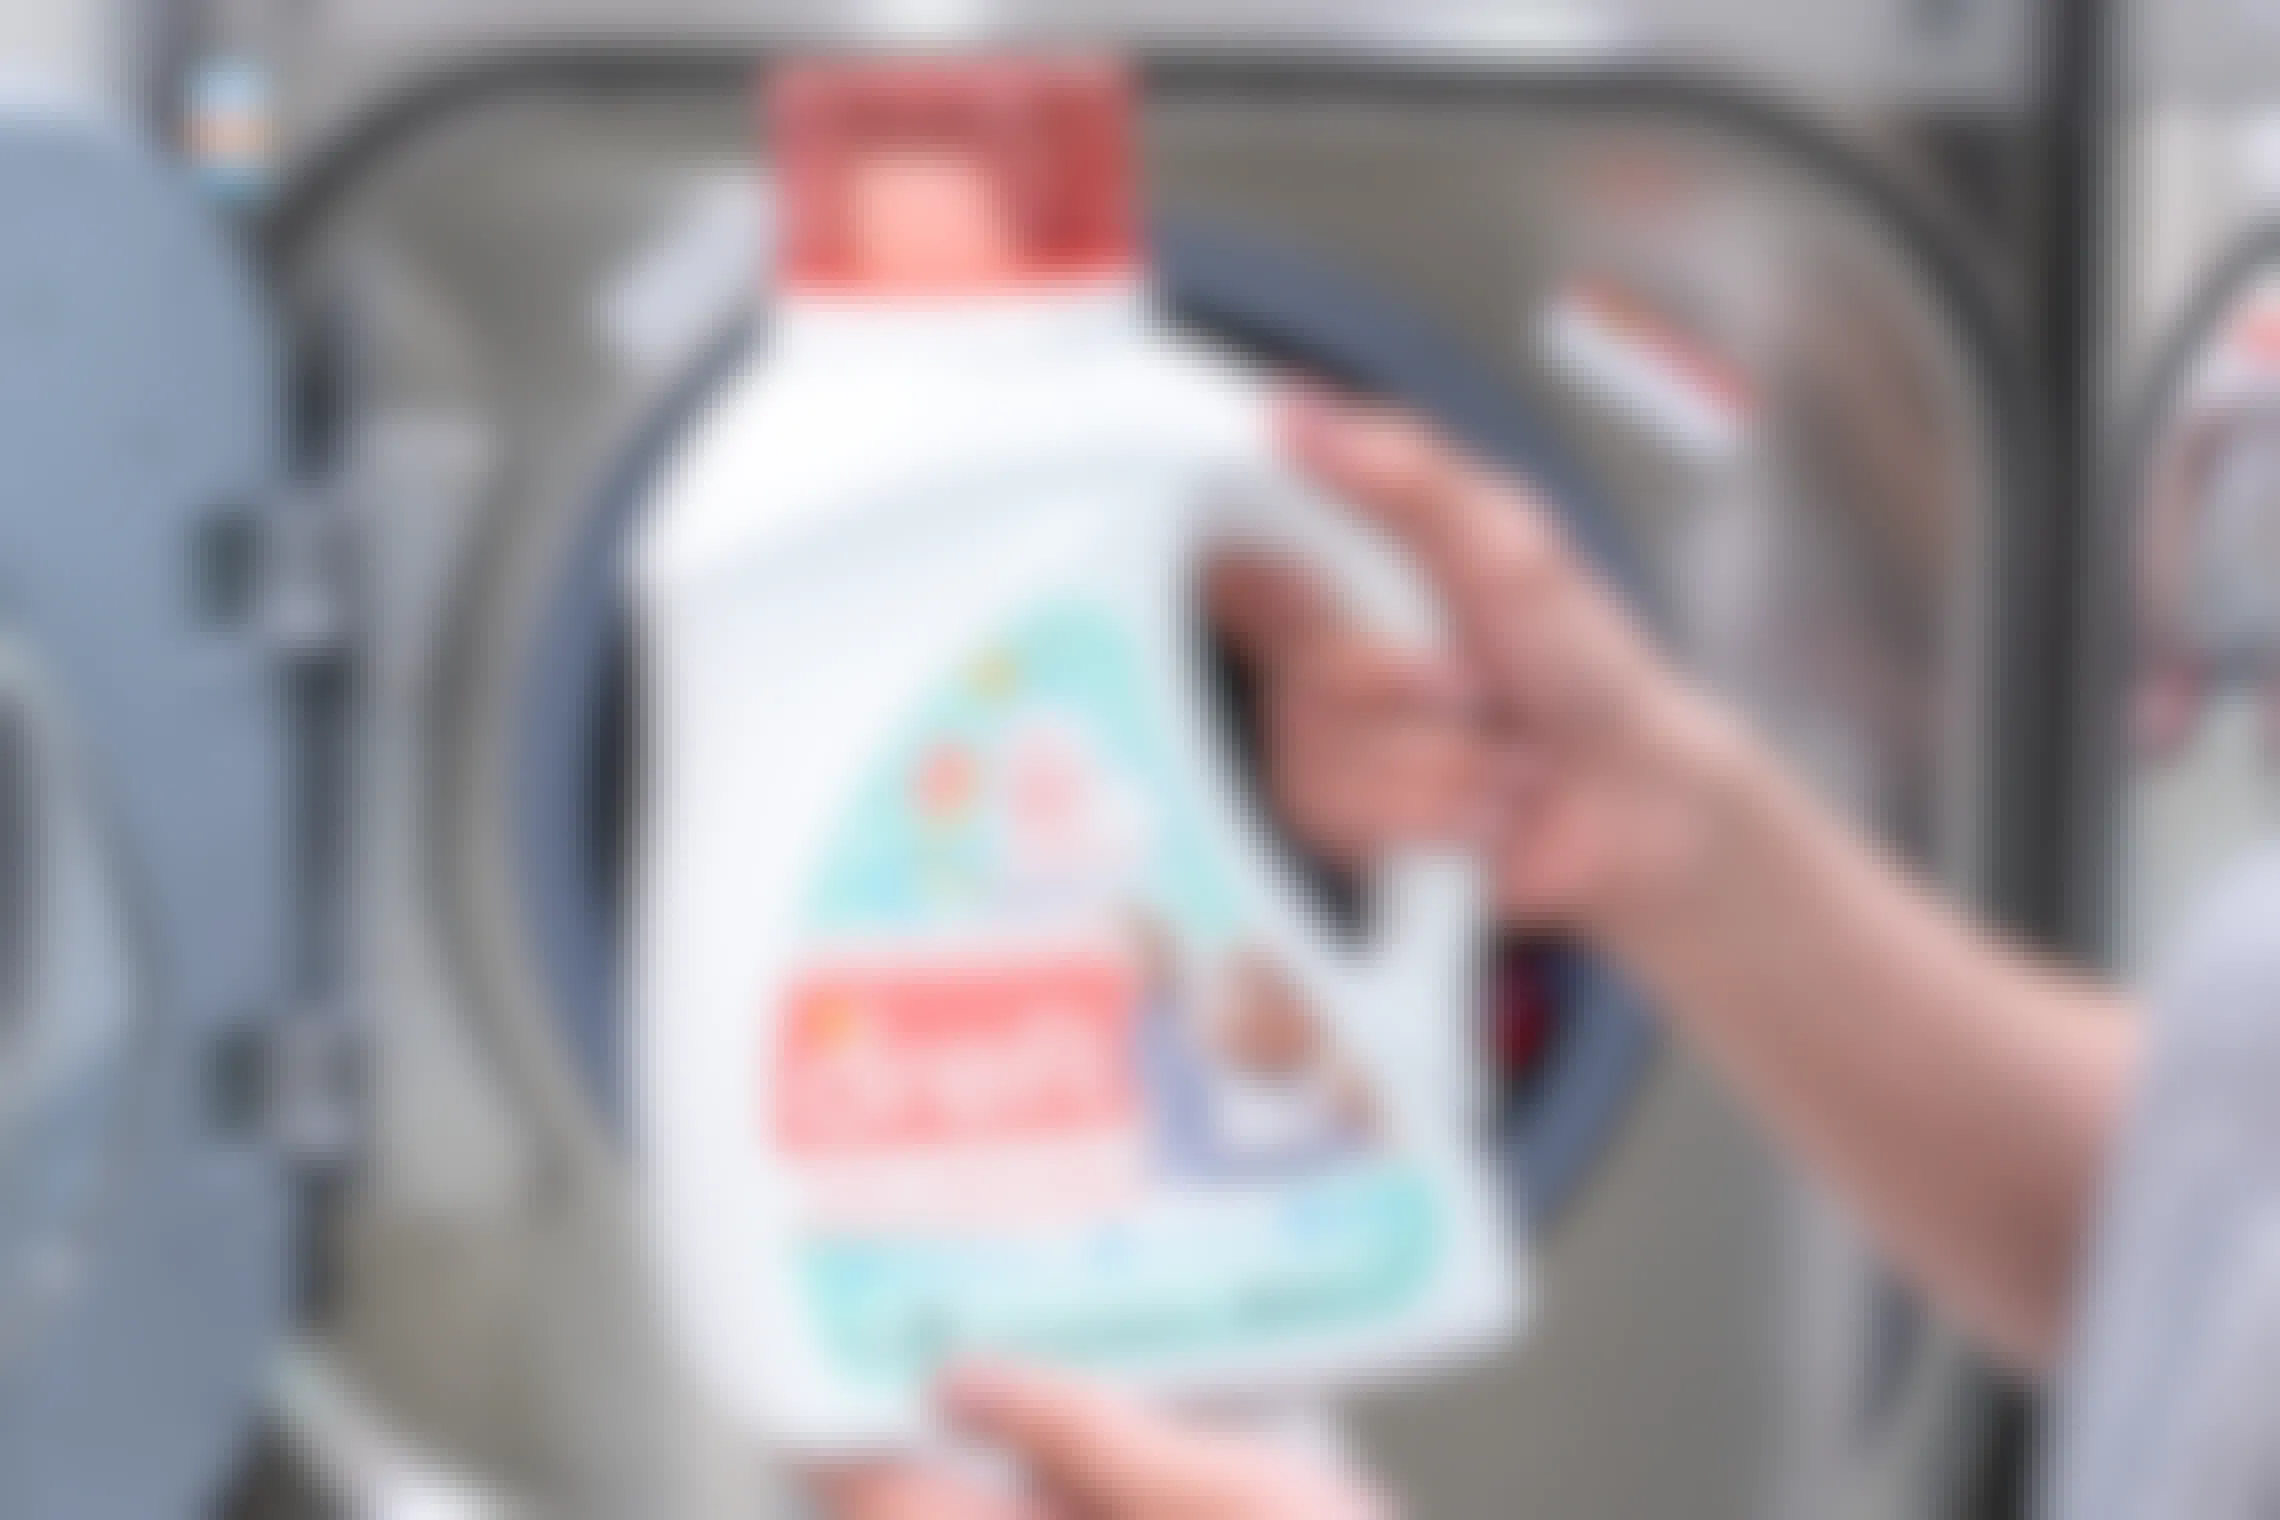 Dreft laundry detergent held in front of a washing machine.